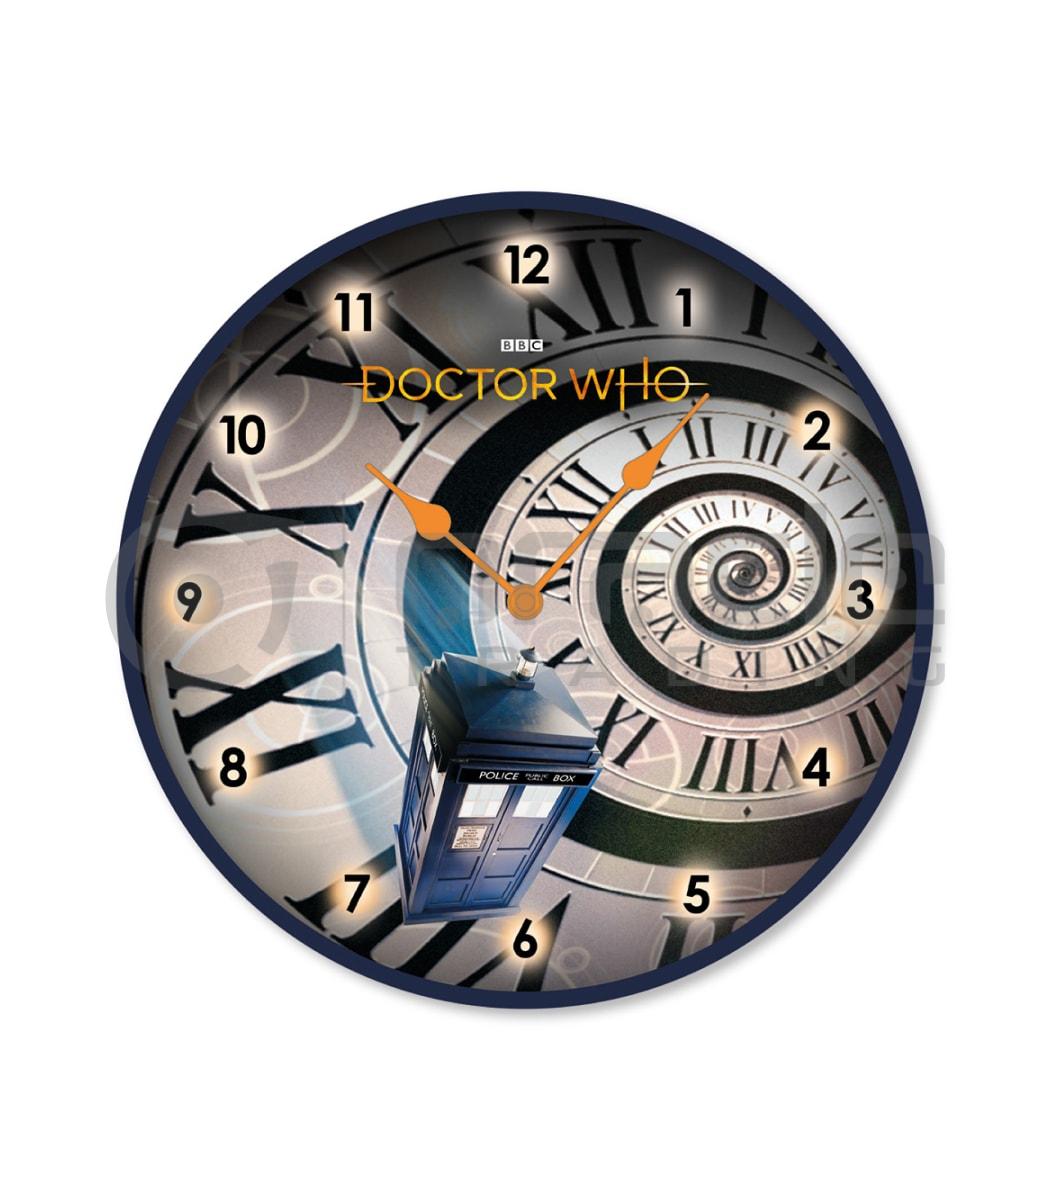 Doctor Who Wall Clock